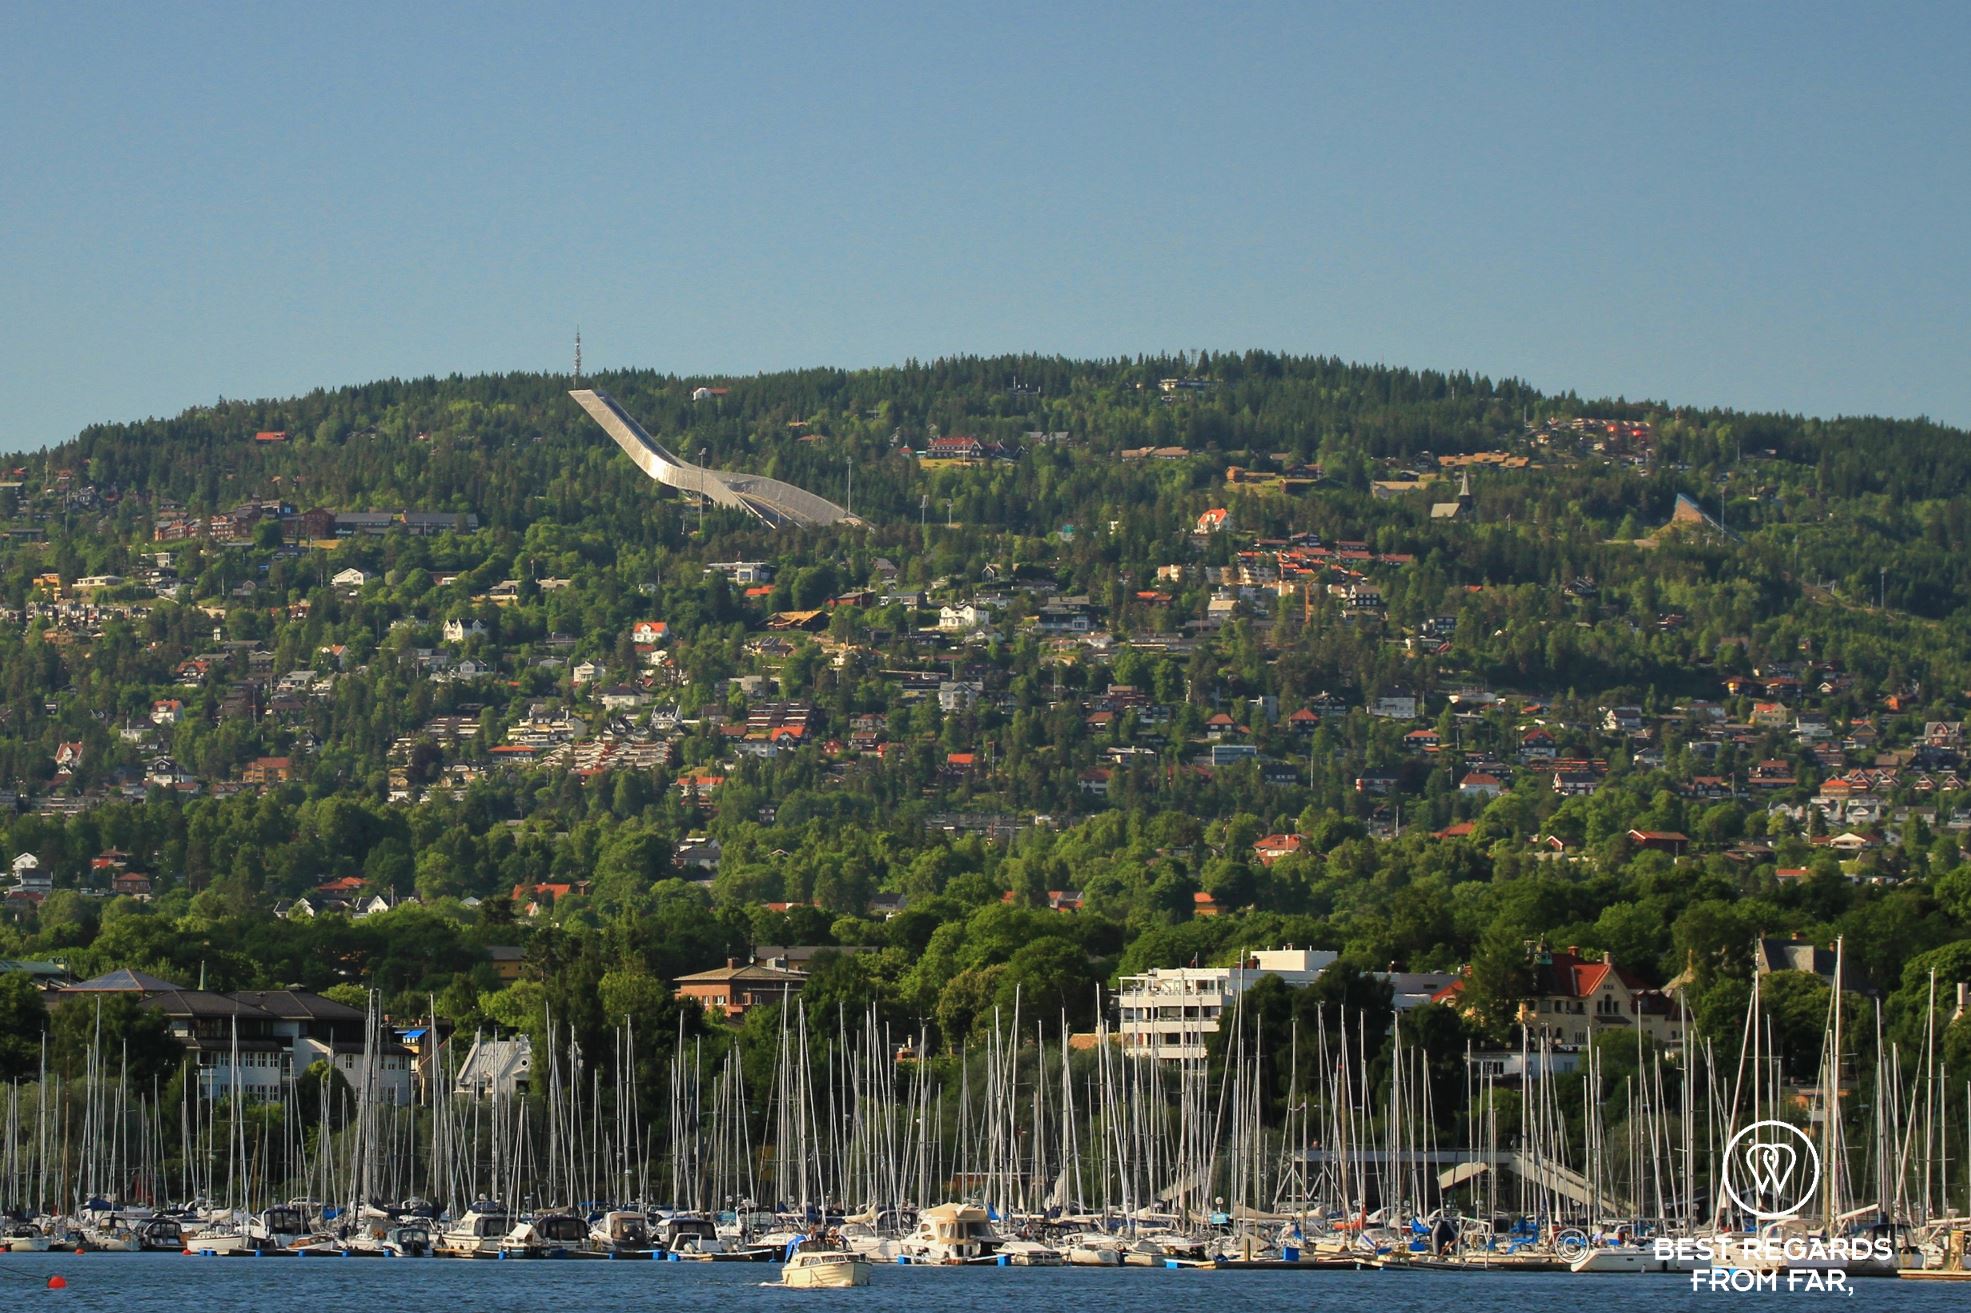 Blue water with a harbour full of sail boats, green mountain with a large ski jump, Oslo, Norway.